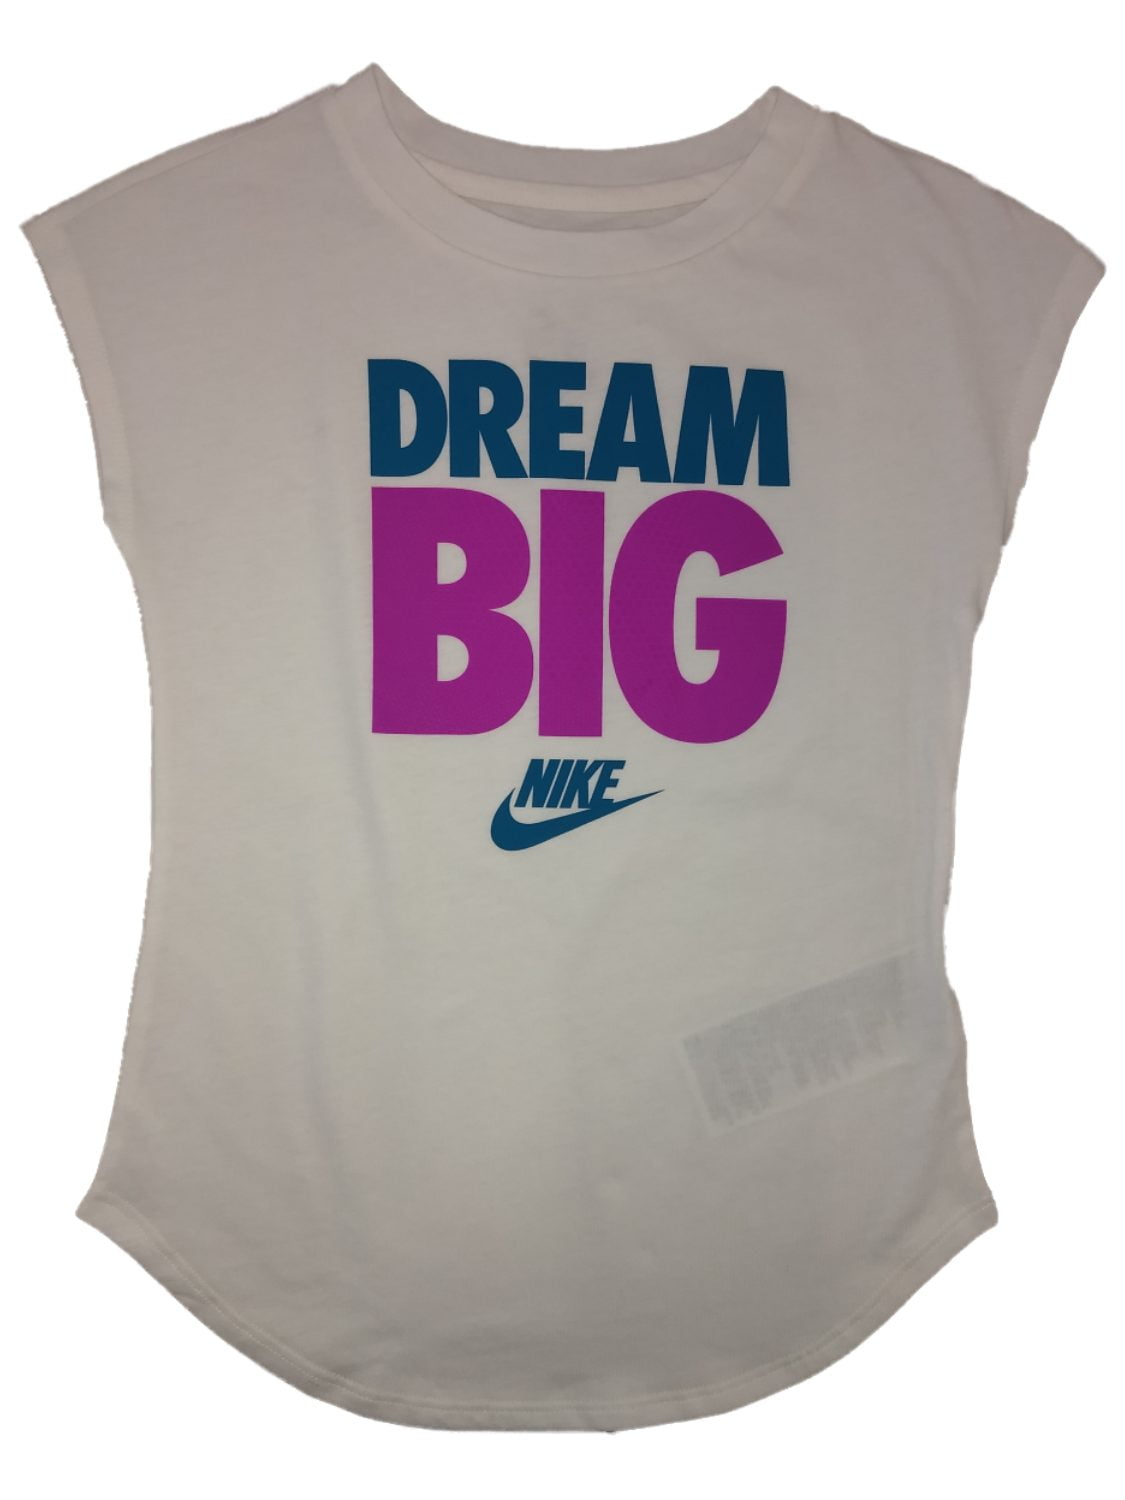 Girls White Dream Athletic T-Shirt Work Out Tee Shirt M (6)